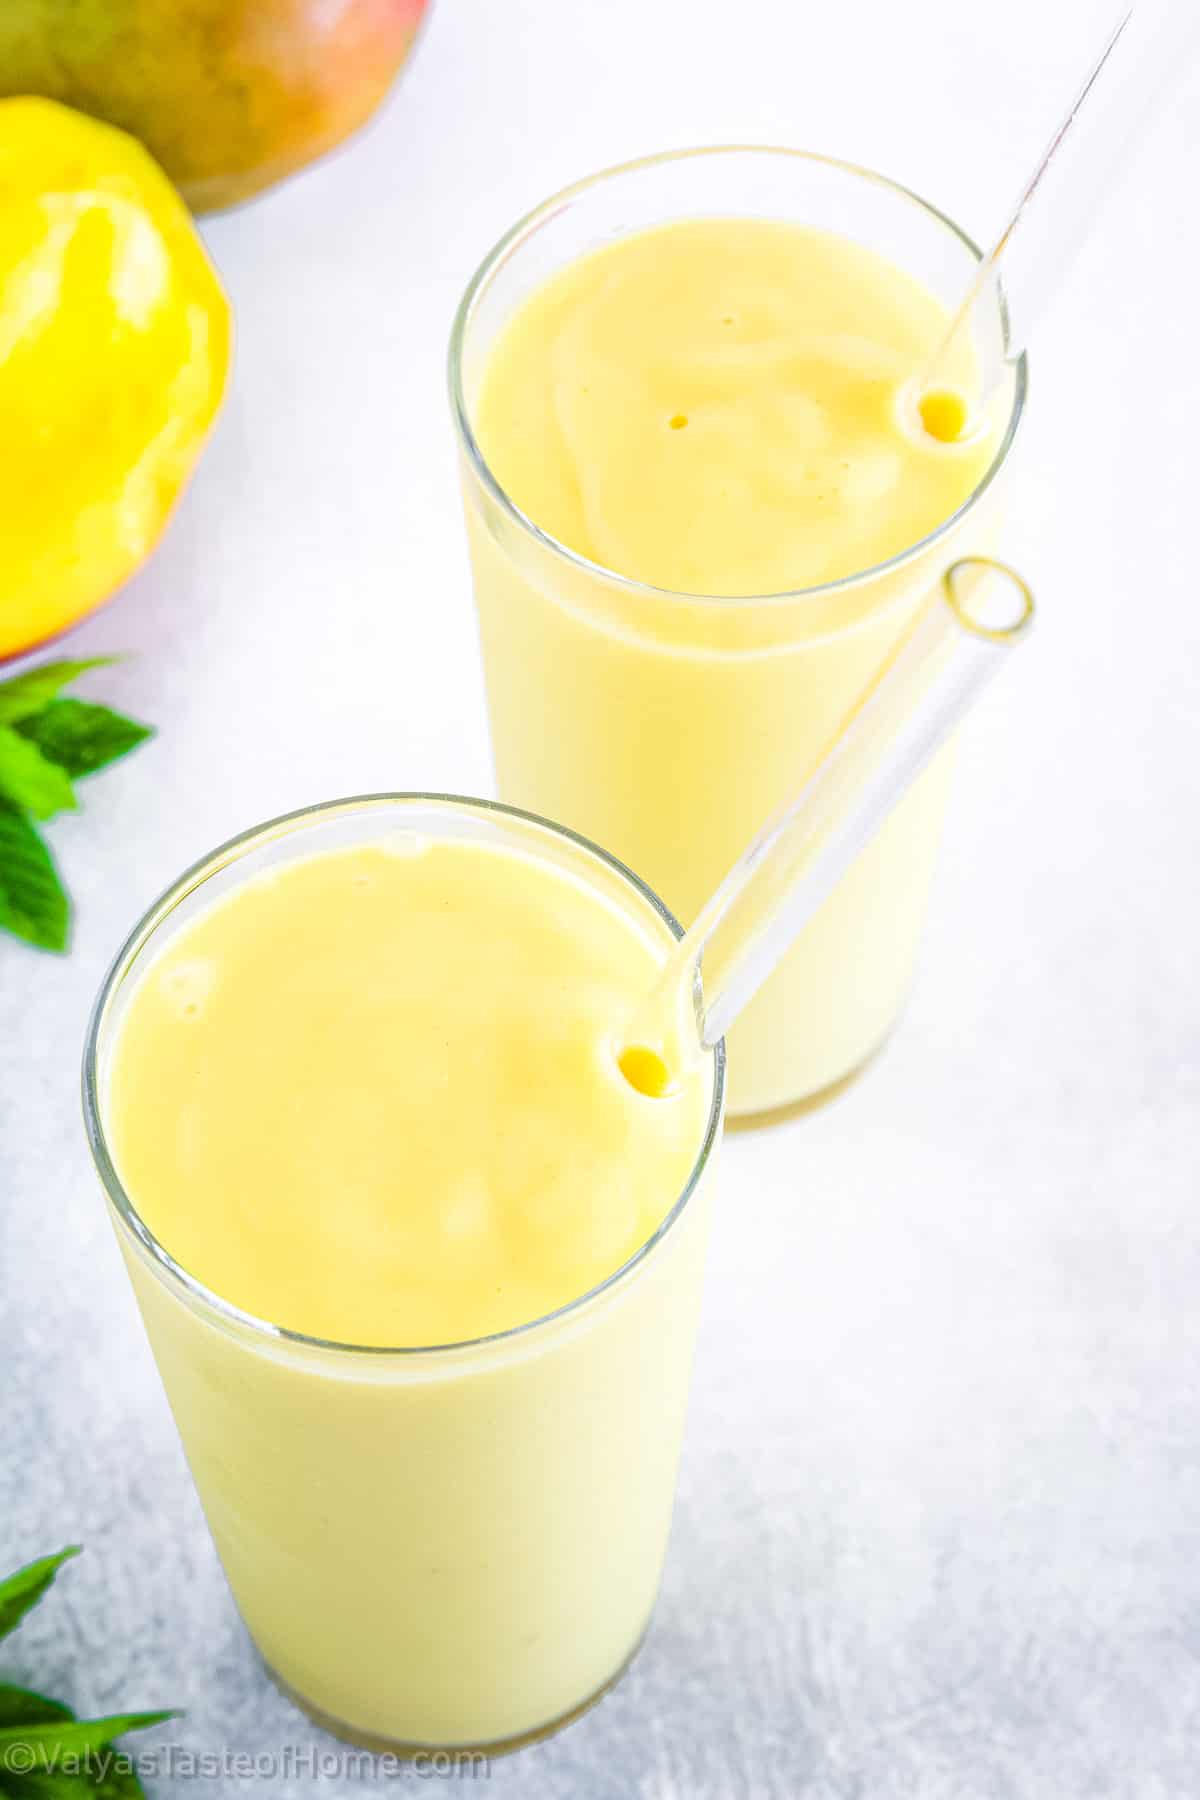 Tropical smoothie refers to a type of beverage made by blending different fruits and vegetables. The smoothie is a nutritious and tasty drink, which is rich in essential vitamins and minerals. 